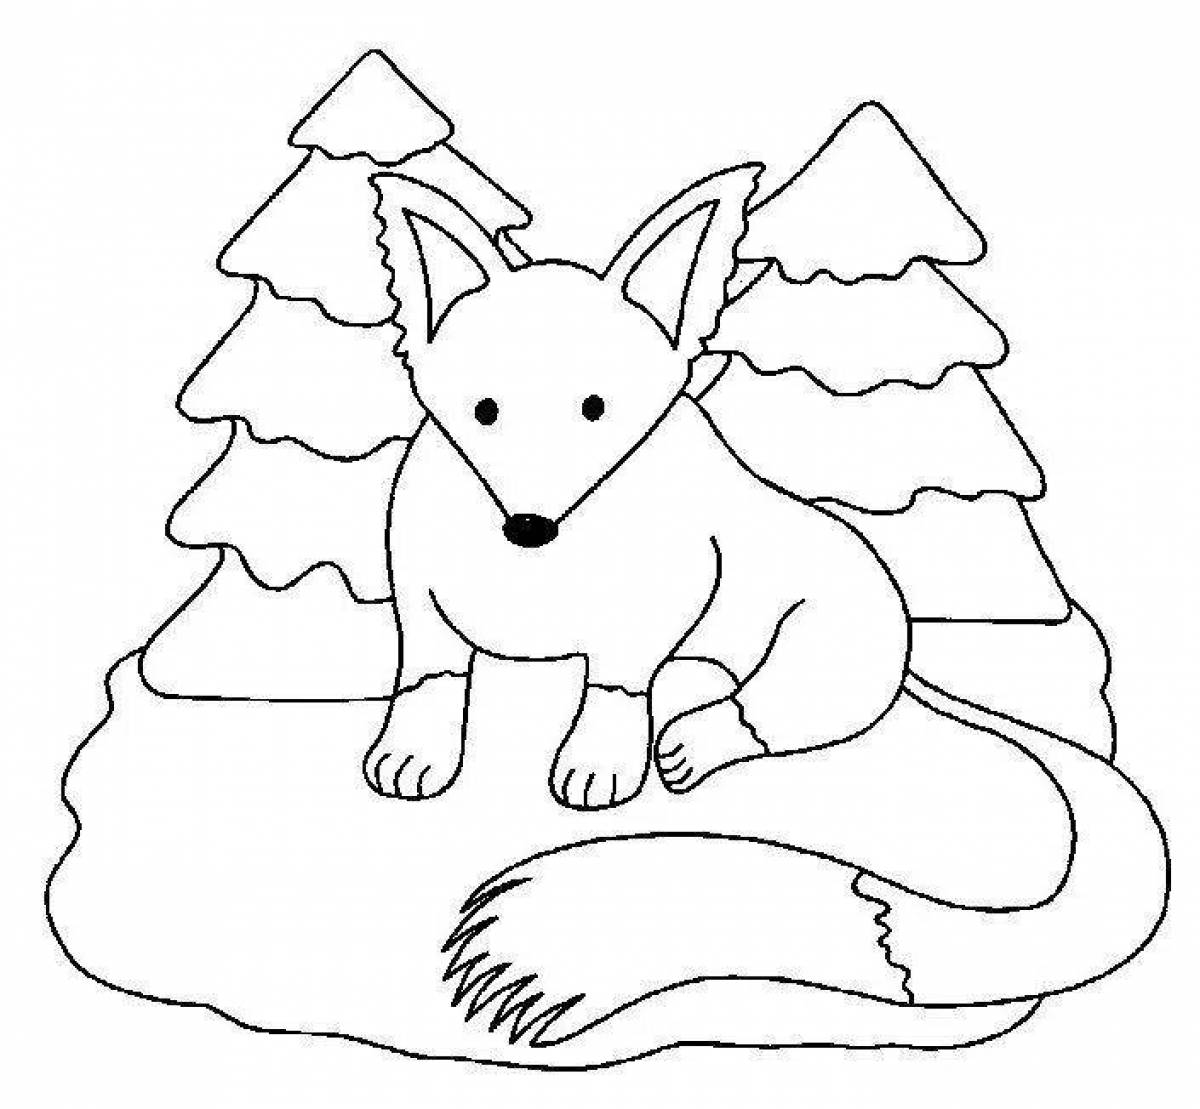 Amazing coloring pages animals in the winter forest